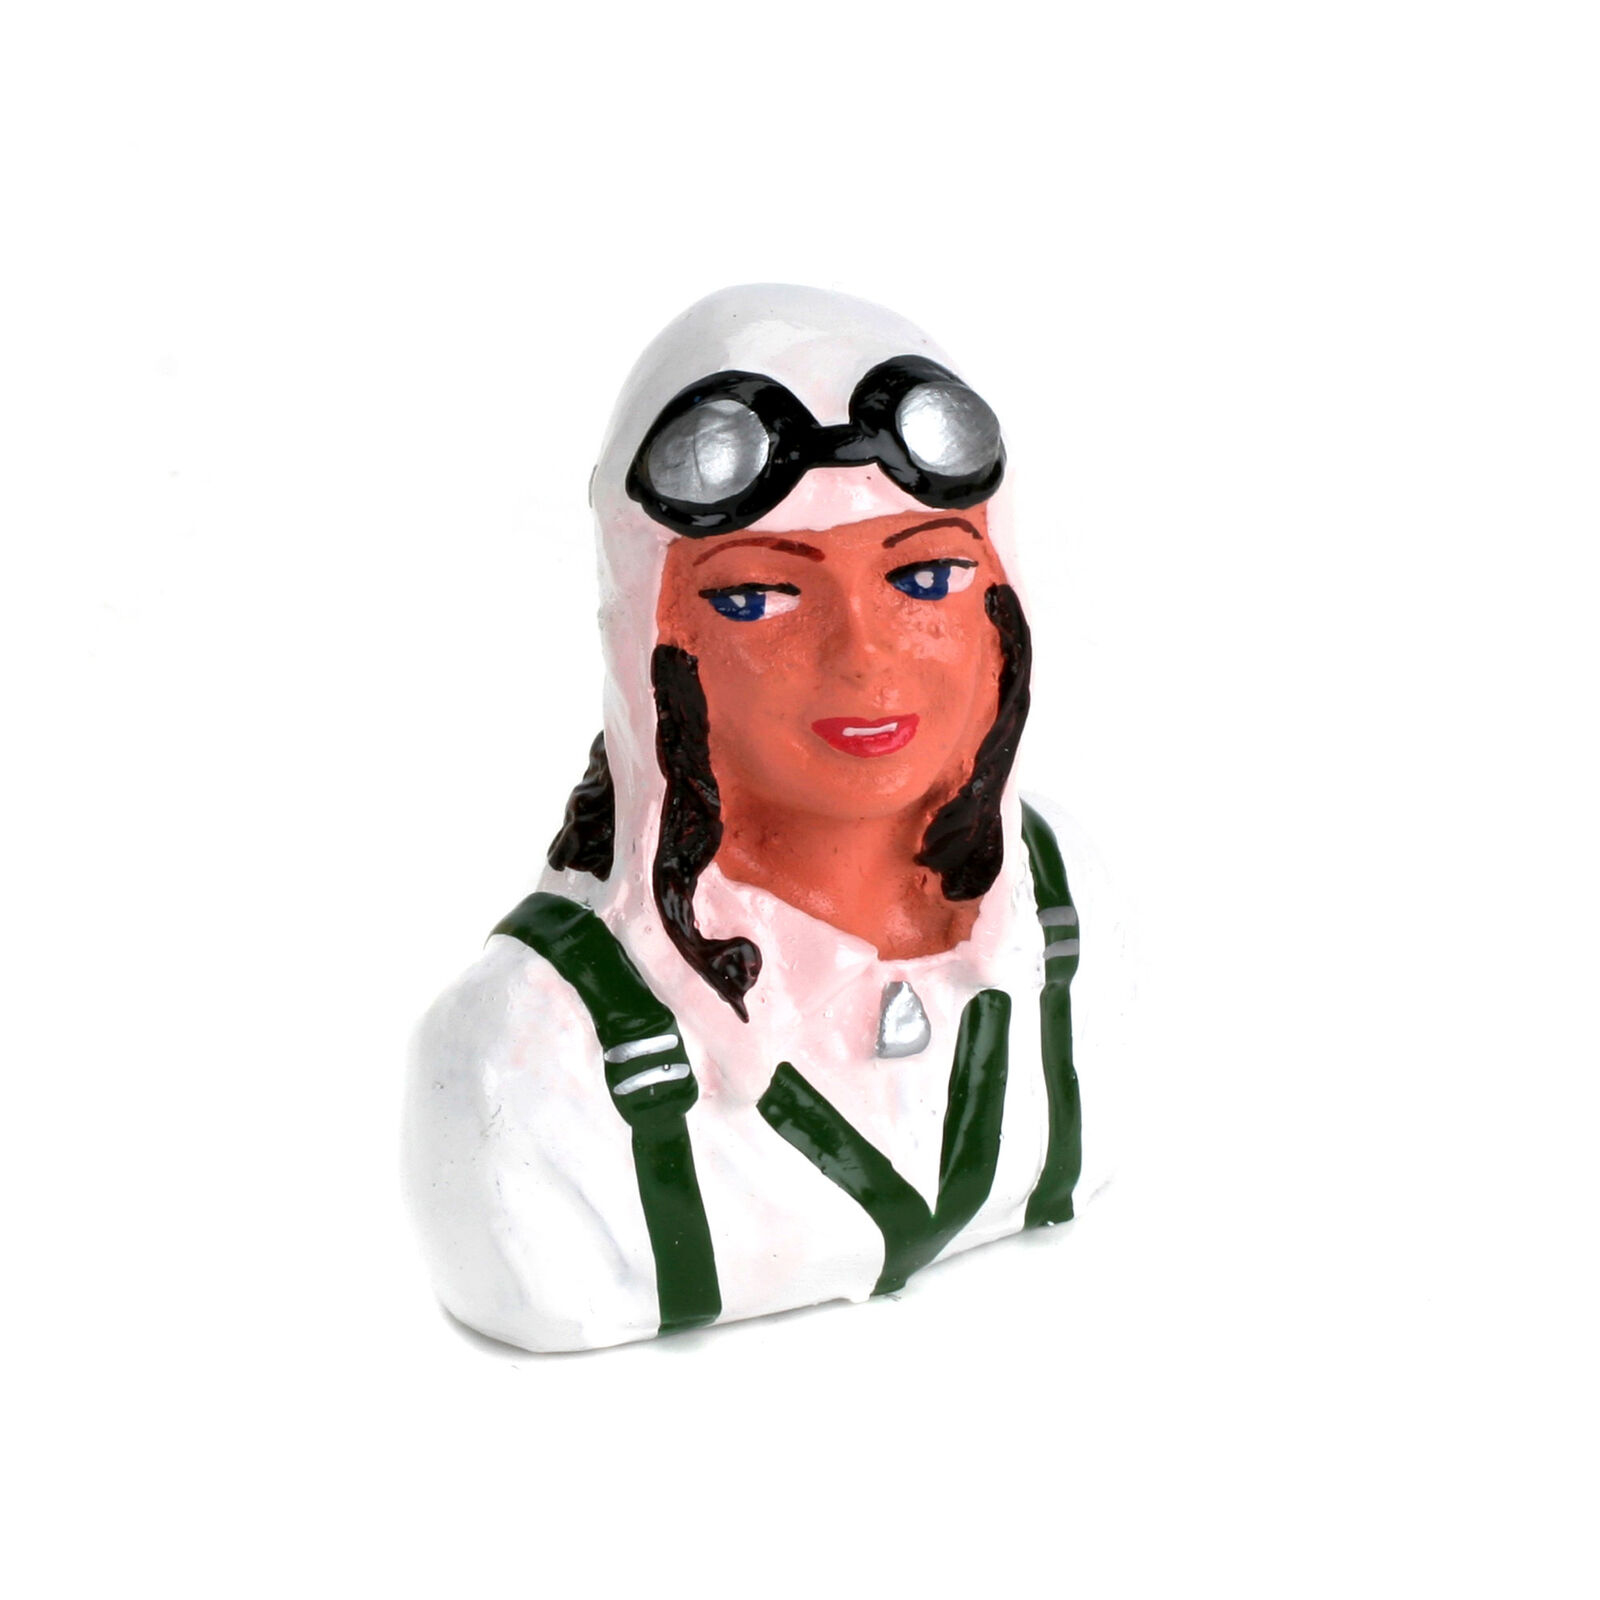 1/9  Pilot, 'Meredith' with Helmet & Goggles